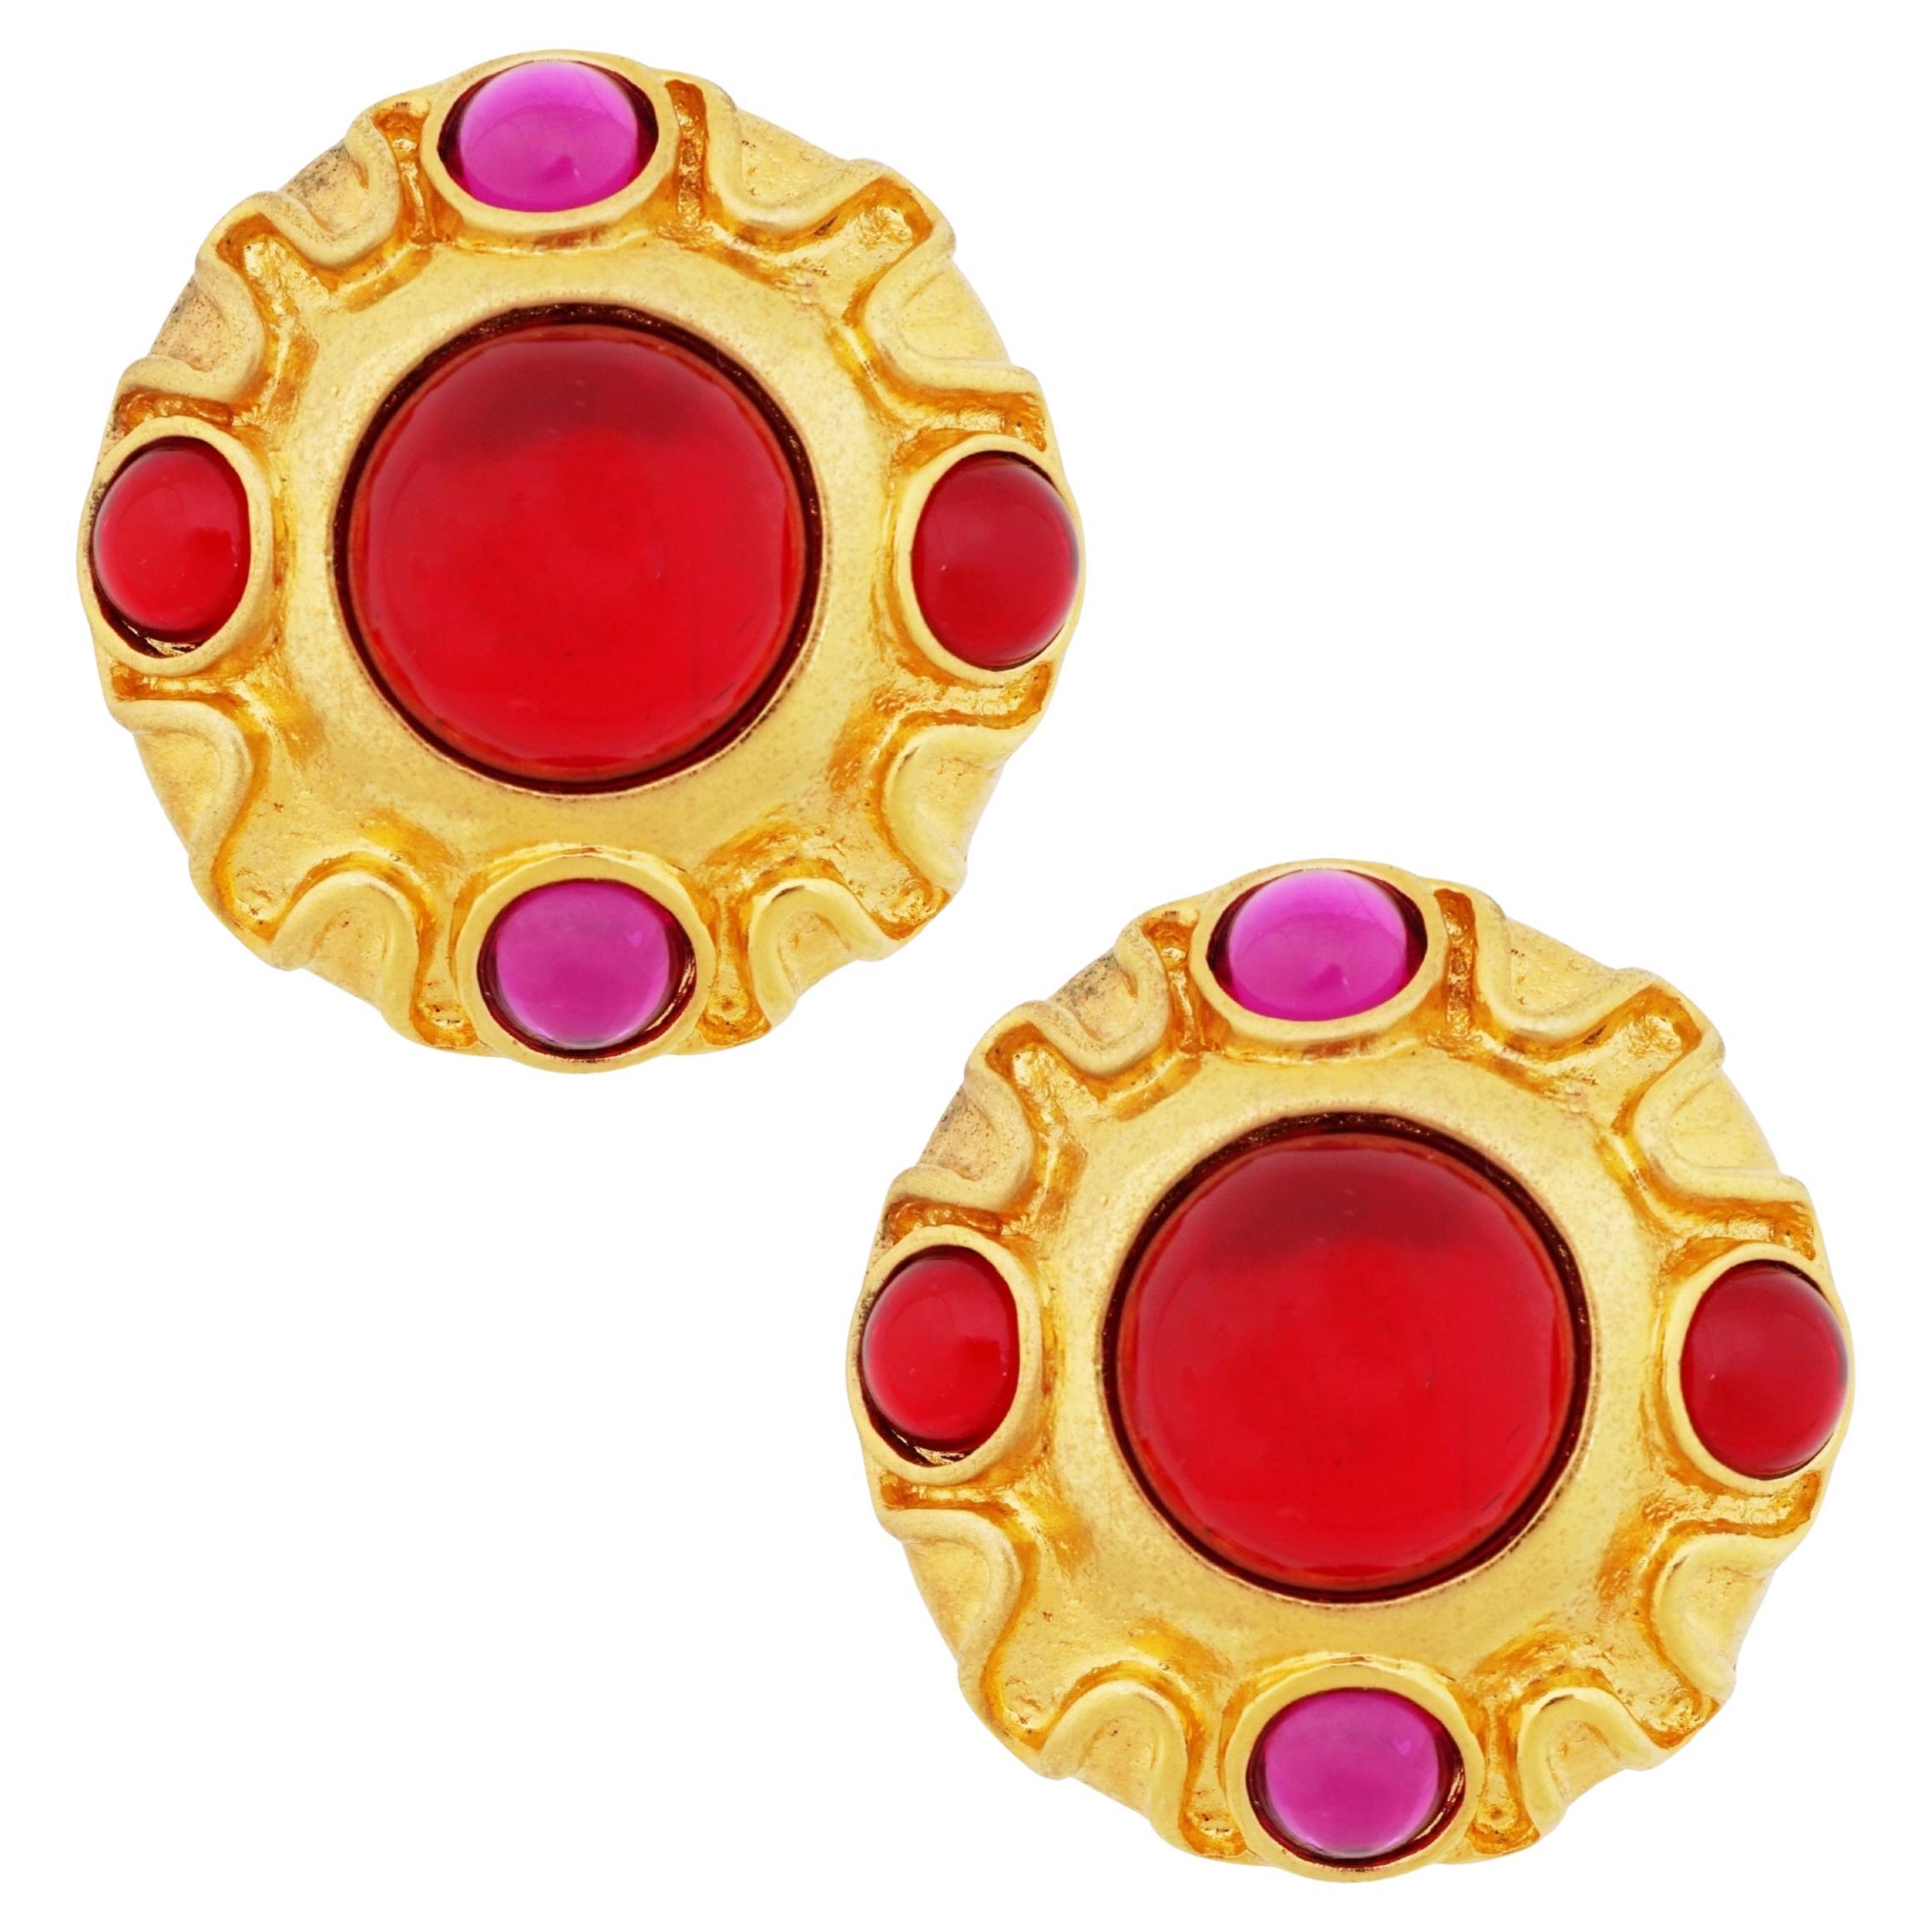 Pink & Red Glass Cabochon Oversized Coin Statement Earrings By Escada, 1990s For Sale